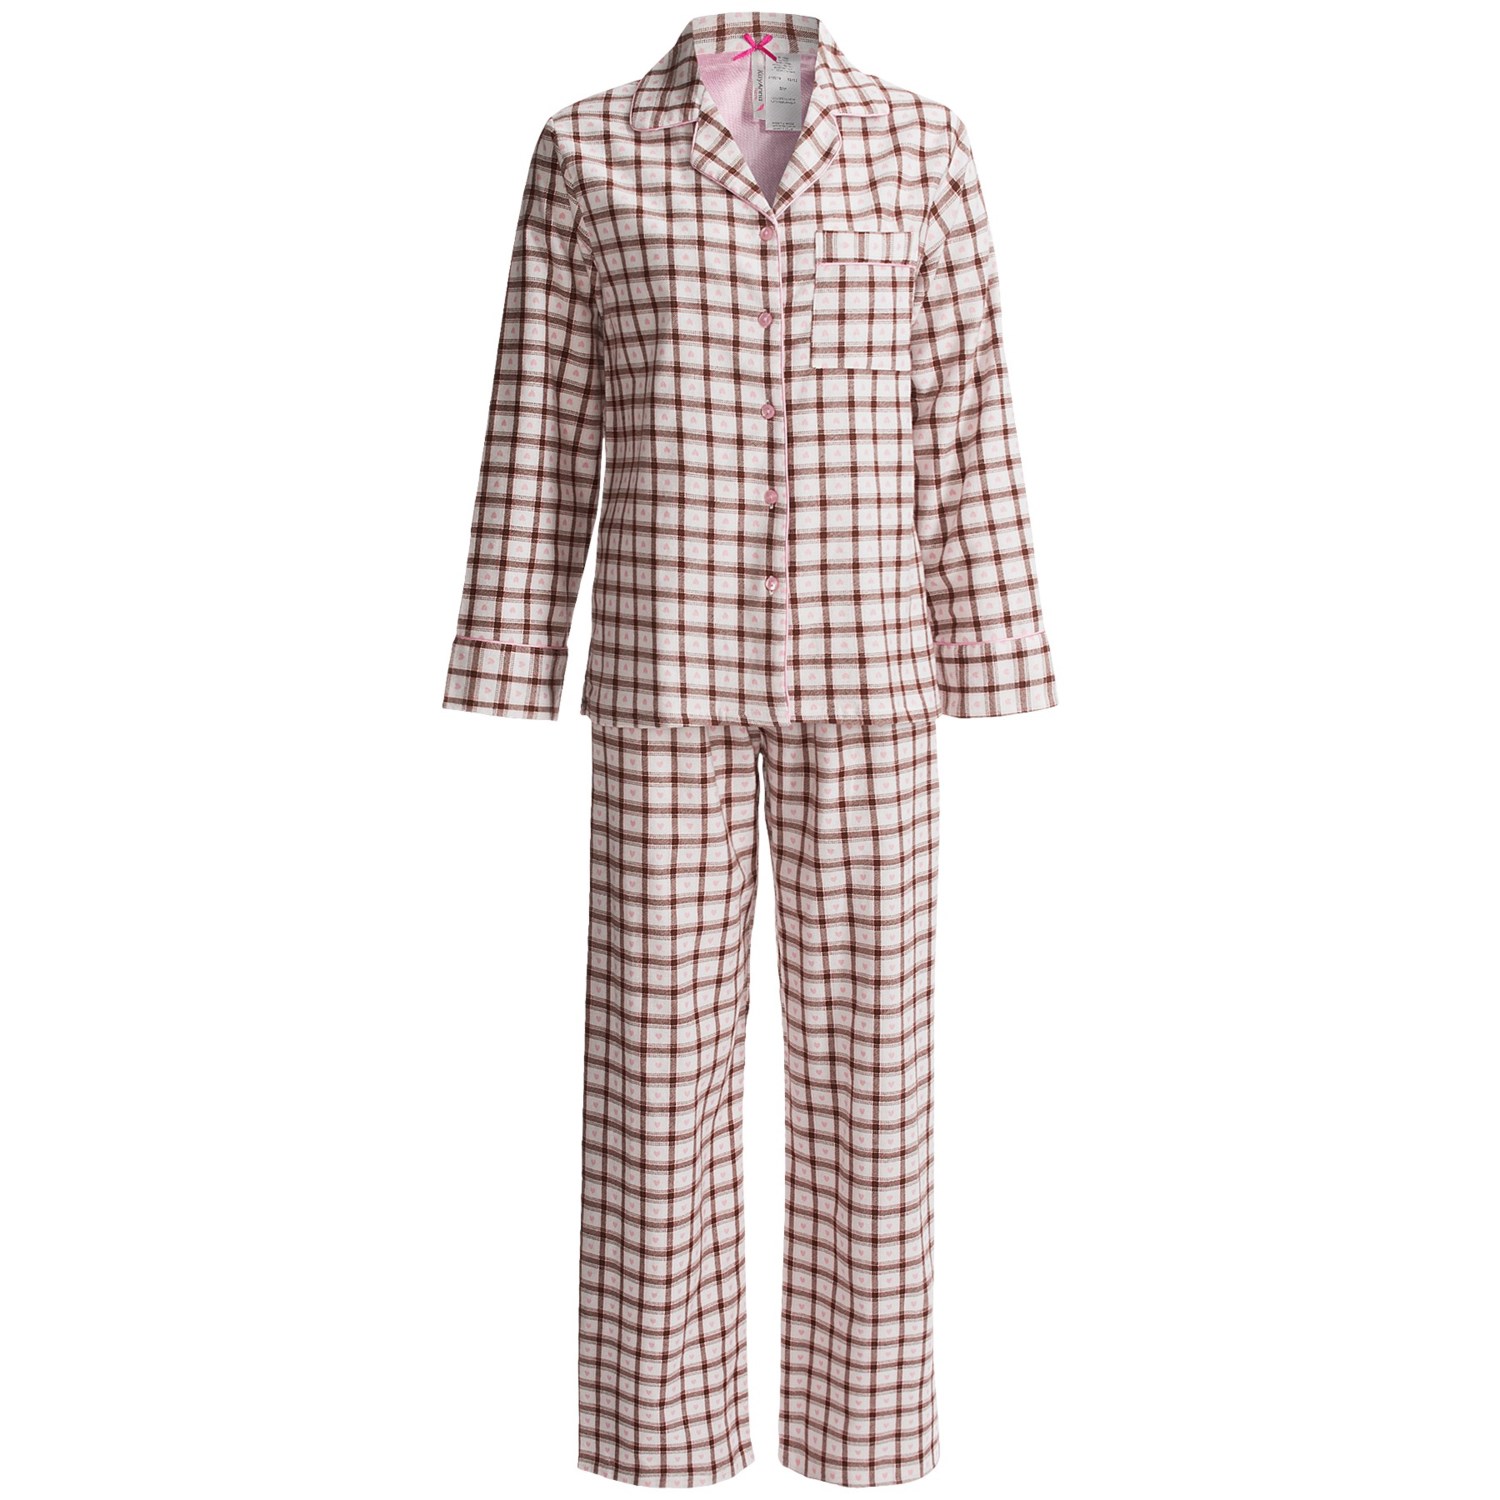 KayAnna Printed Flannel Pajamas - Cotton, Long Sleeve (For Women ...